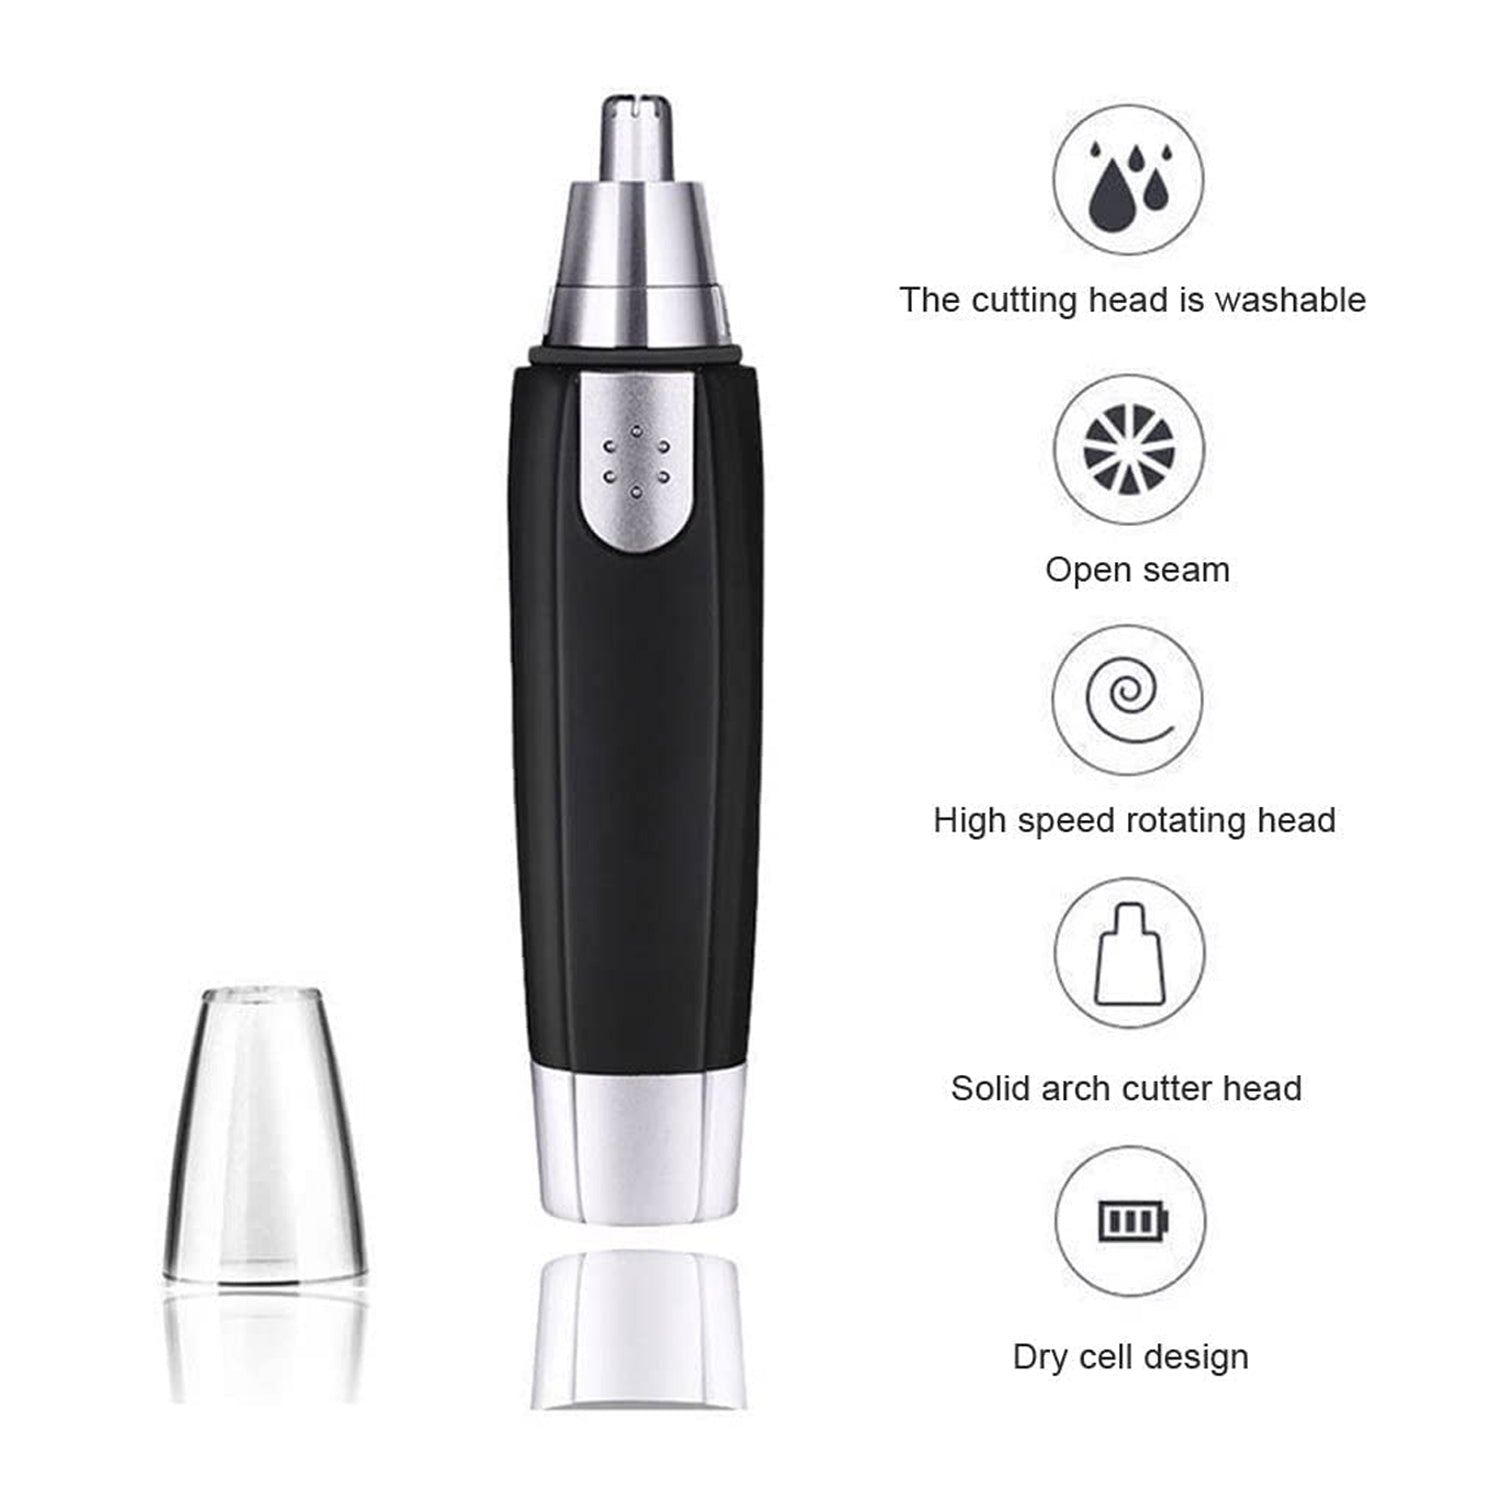 NON RECHARGABLE MINI NOSE AND EAR HAIR TRIMMER